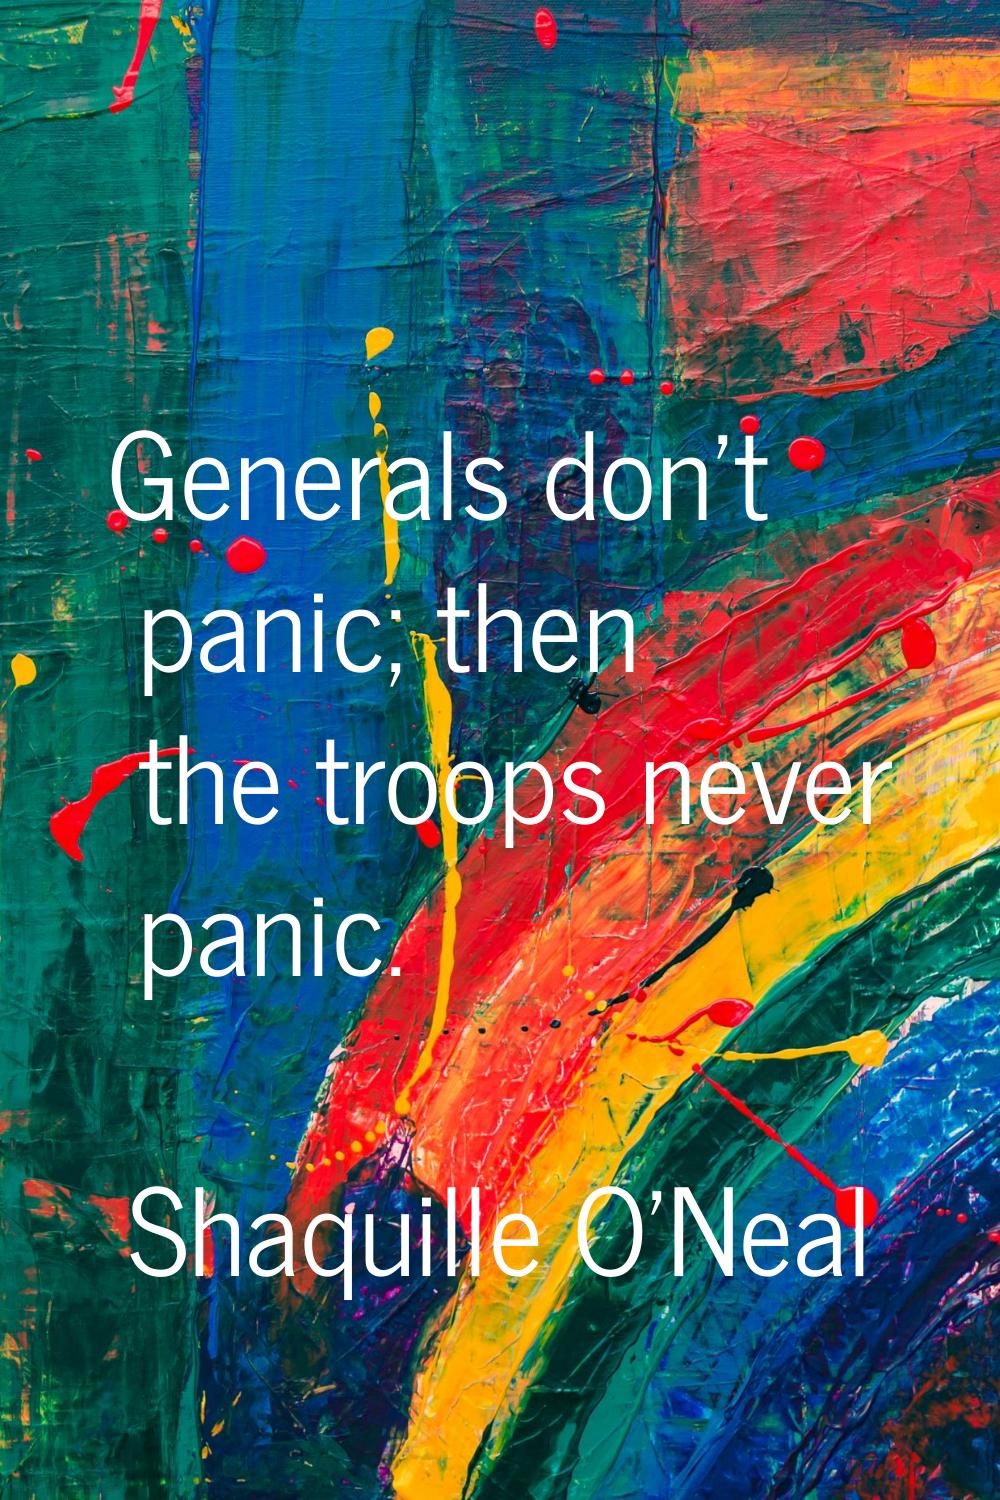 Generals don't panic; then the troops never panic.